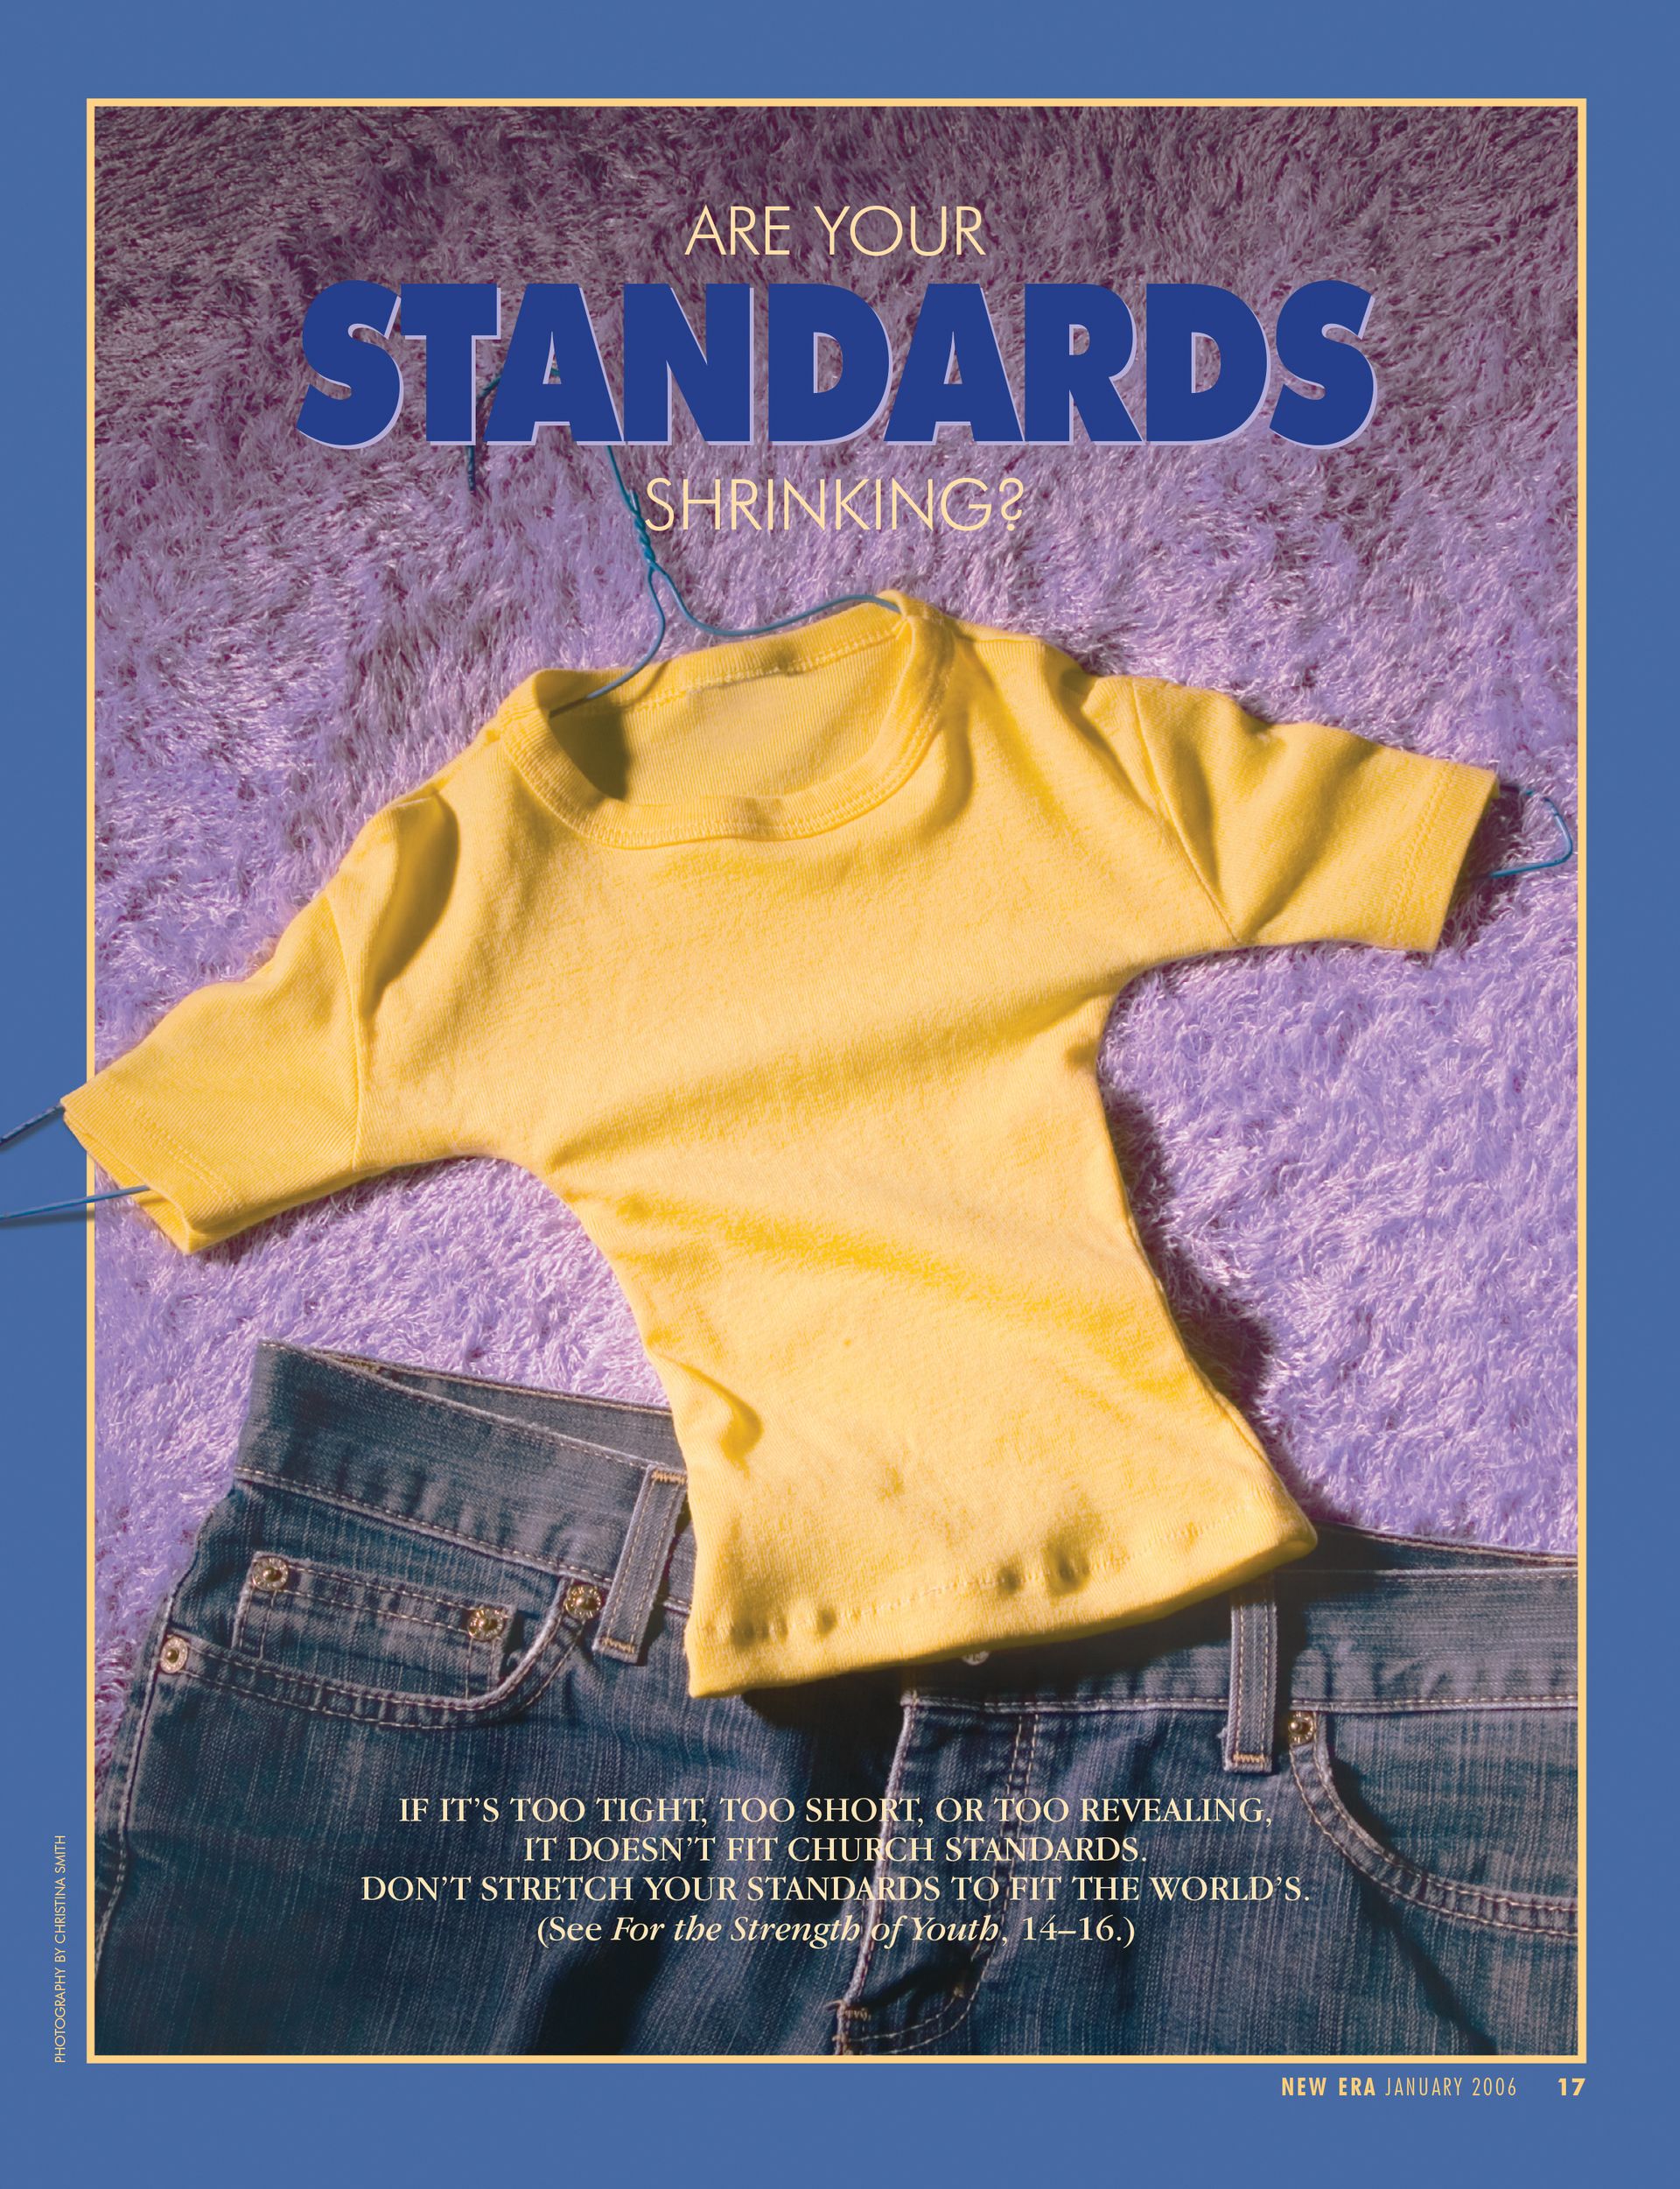 Are Your Standards Shrinking? If it’s too tight, too short, or too revealing, it doesn’t fit Church standards. Don't stretch your standards to fit the world’s. (See For the Strength of Youth, 14–16.) Jan. 2006 © undefined ipCode 1.